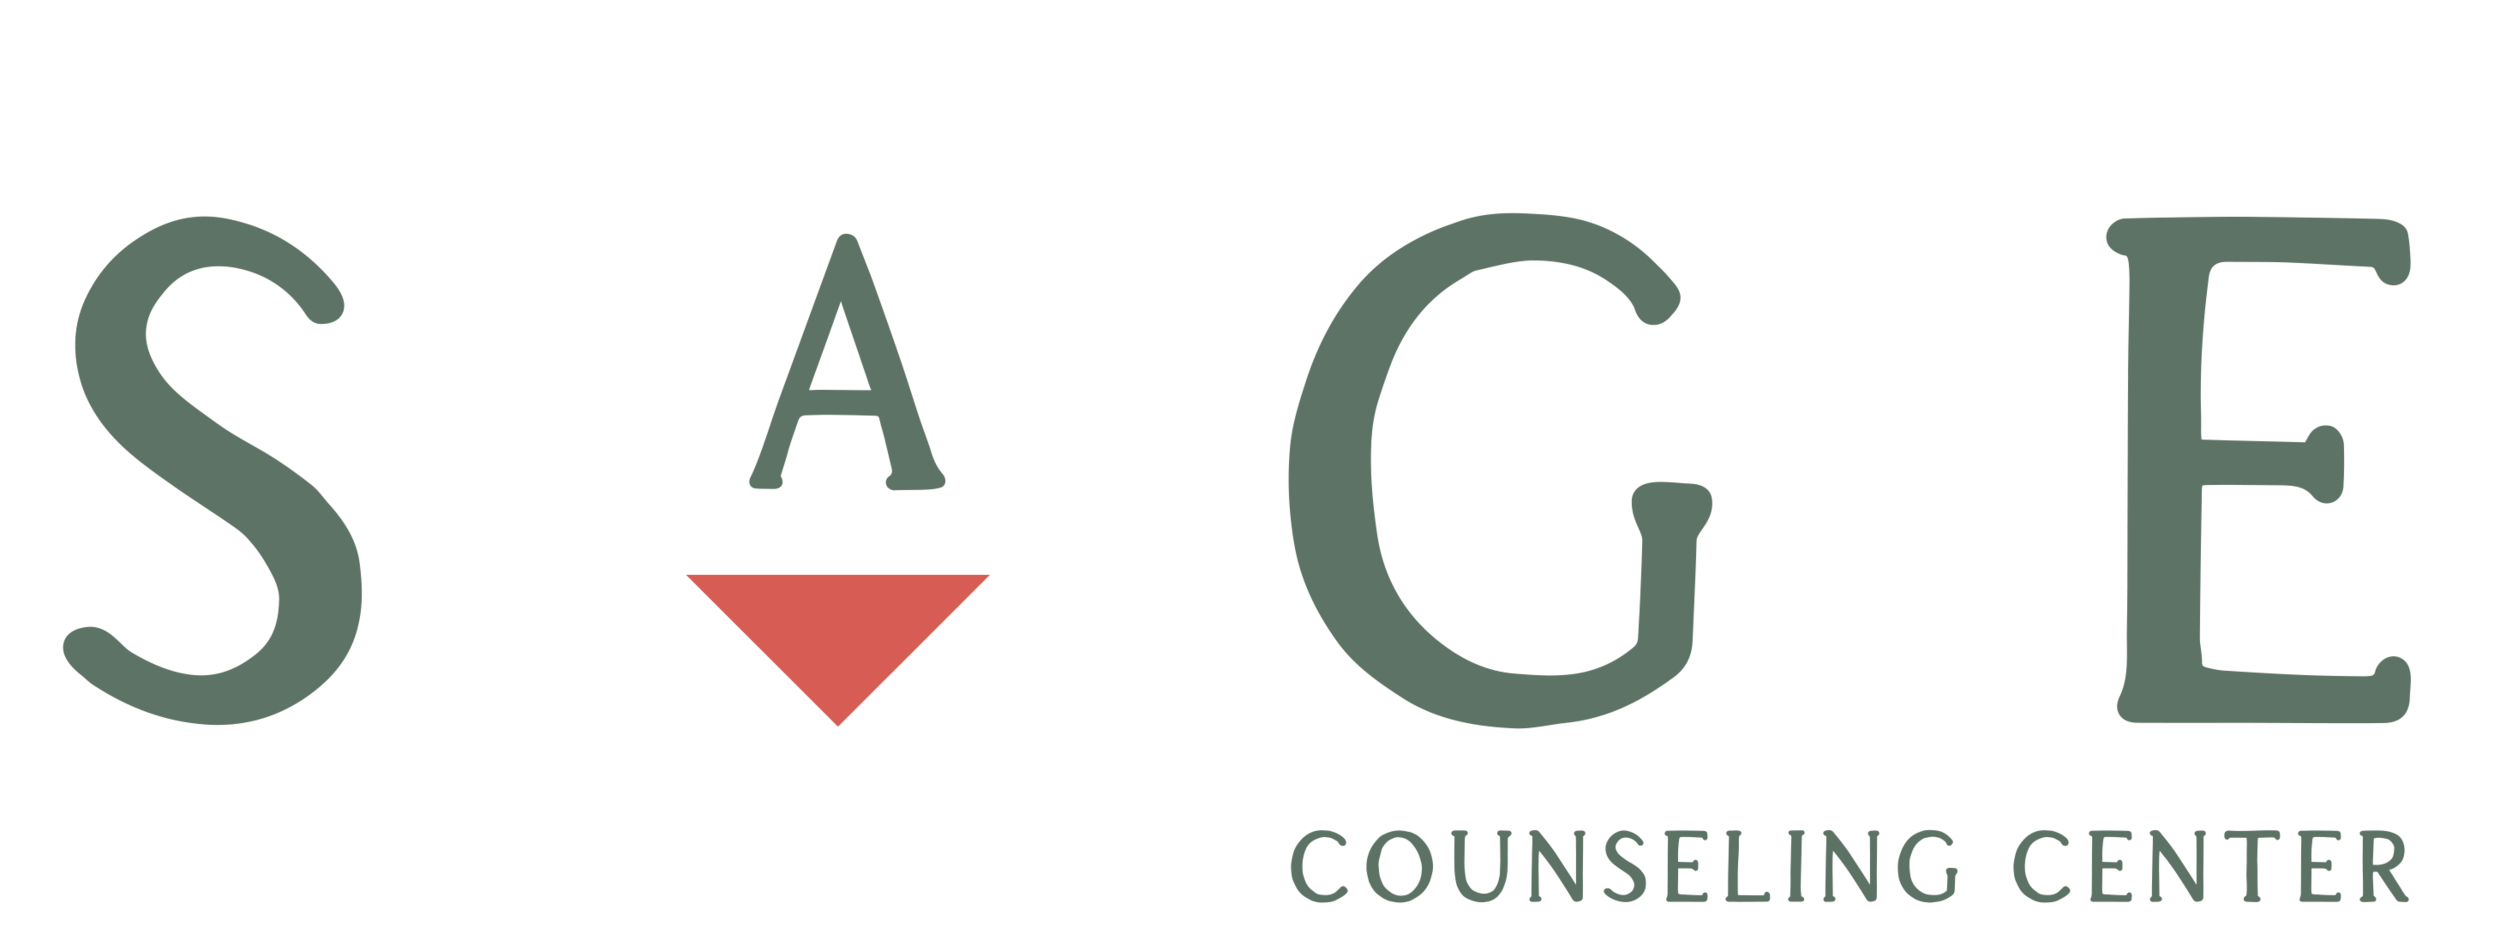 Sage Counseling Center